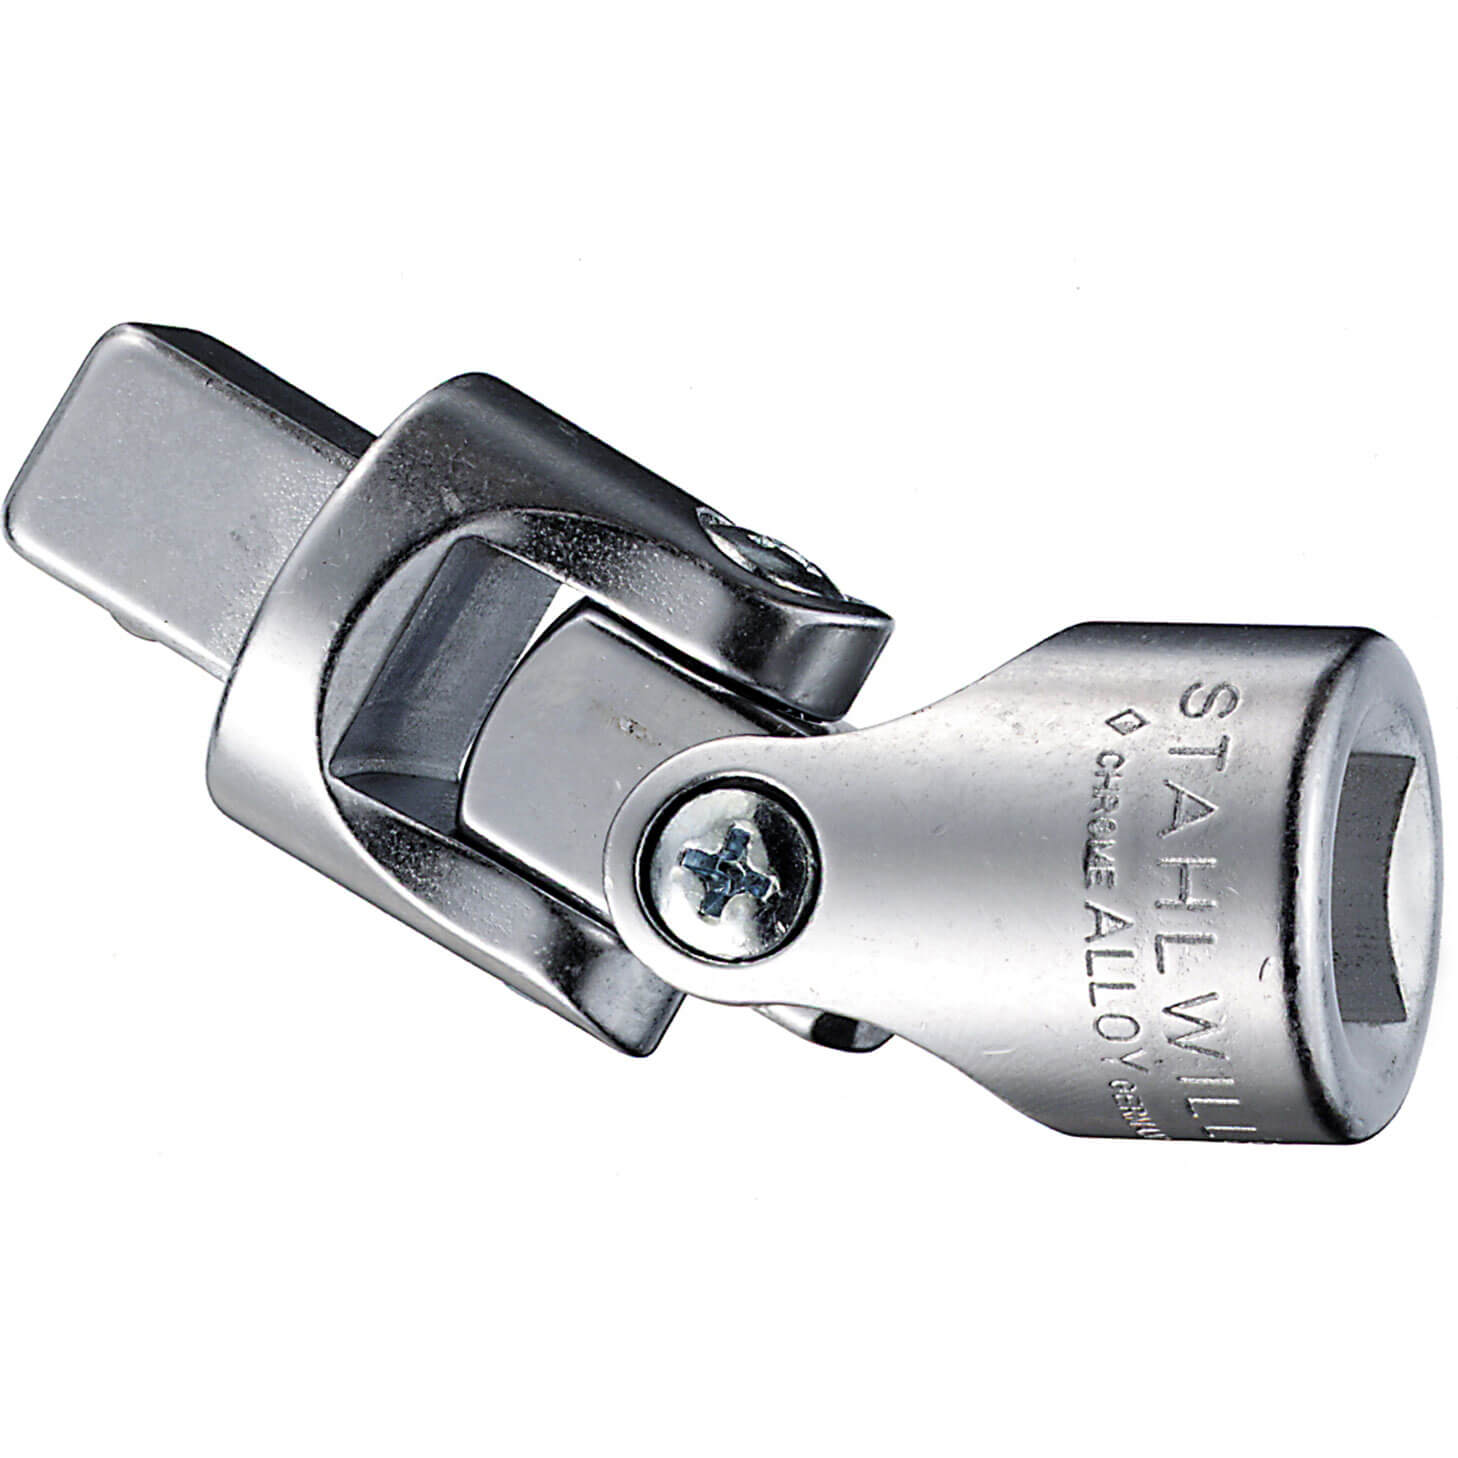 Image of Stahlwille 1/2" Drive Universal Joint 1/2"